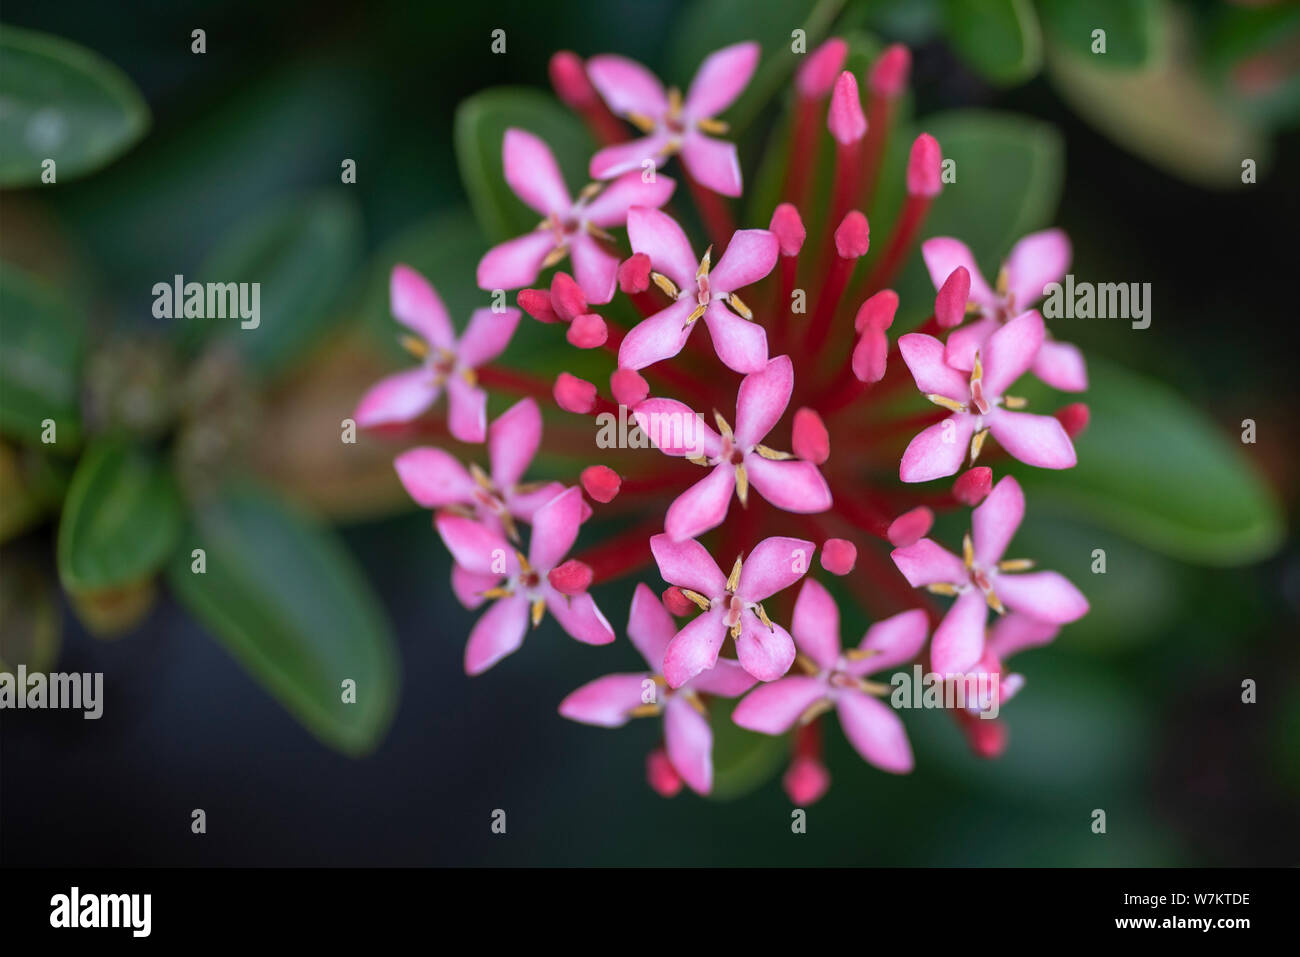 Beautiful red flowers of the plant Ixora chinensis in natural light. Close-up. Thailand, Koh Chang Island. Stock Photo